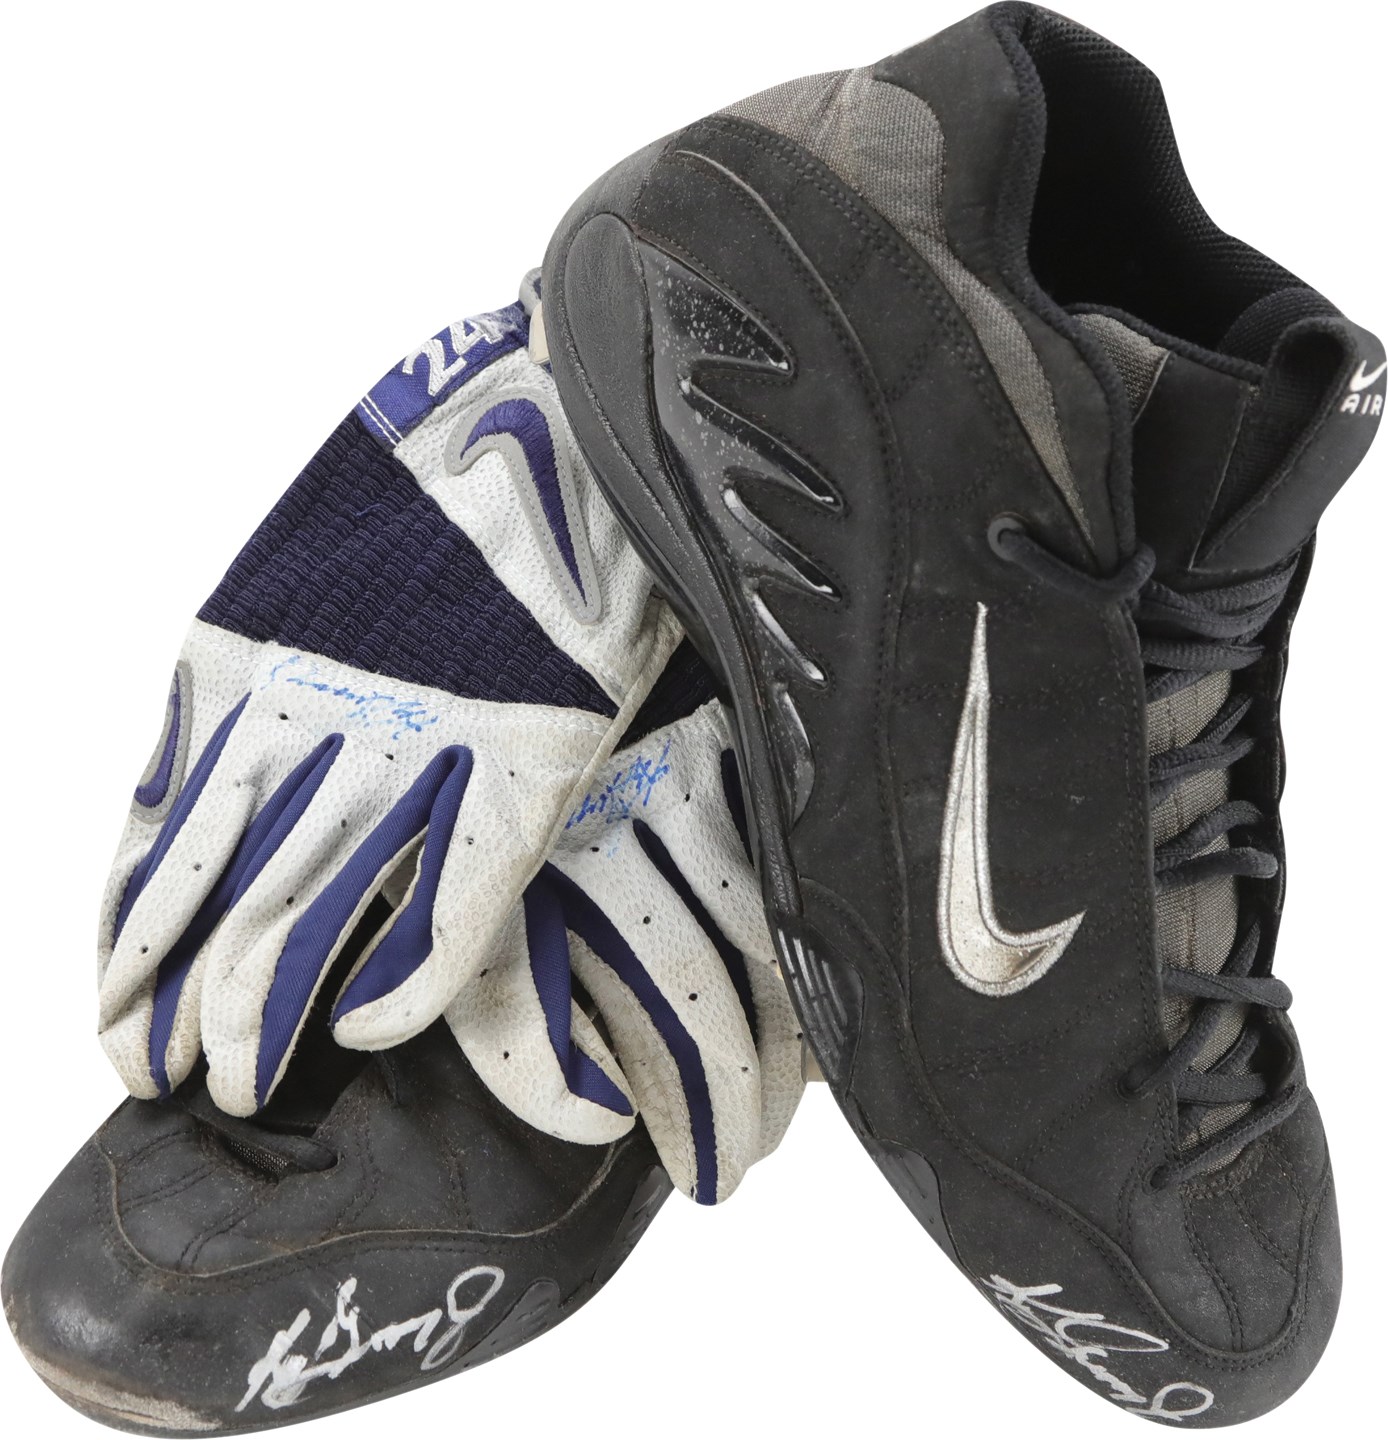 - 1998-99 Ken Griffey Jr. Seattle Mariners Signed Game Used Cleats & Batting Gloves (Griffey Jr. COA)